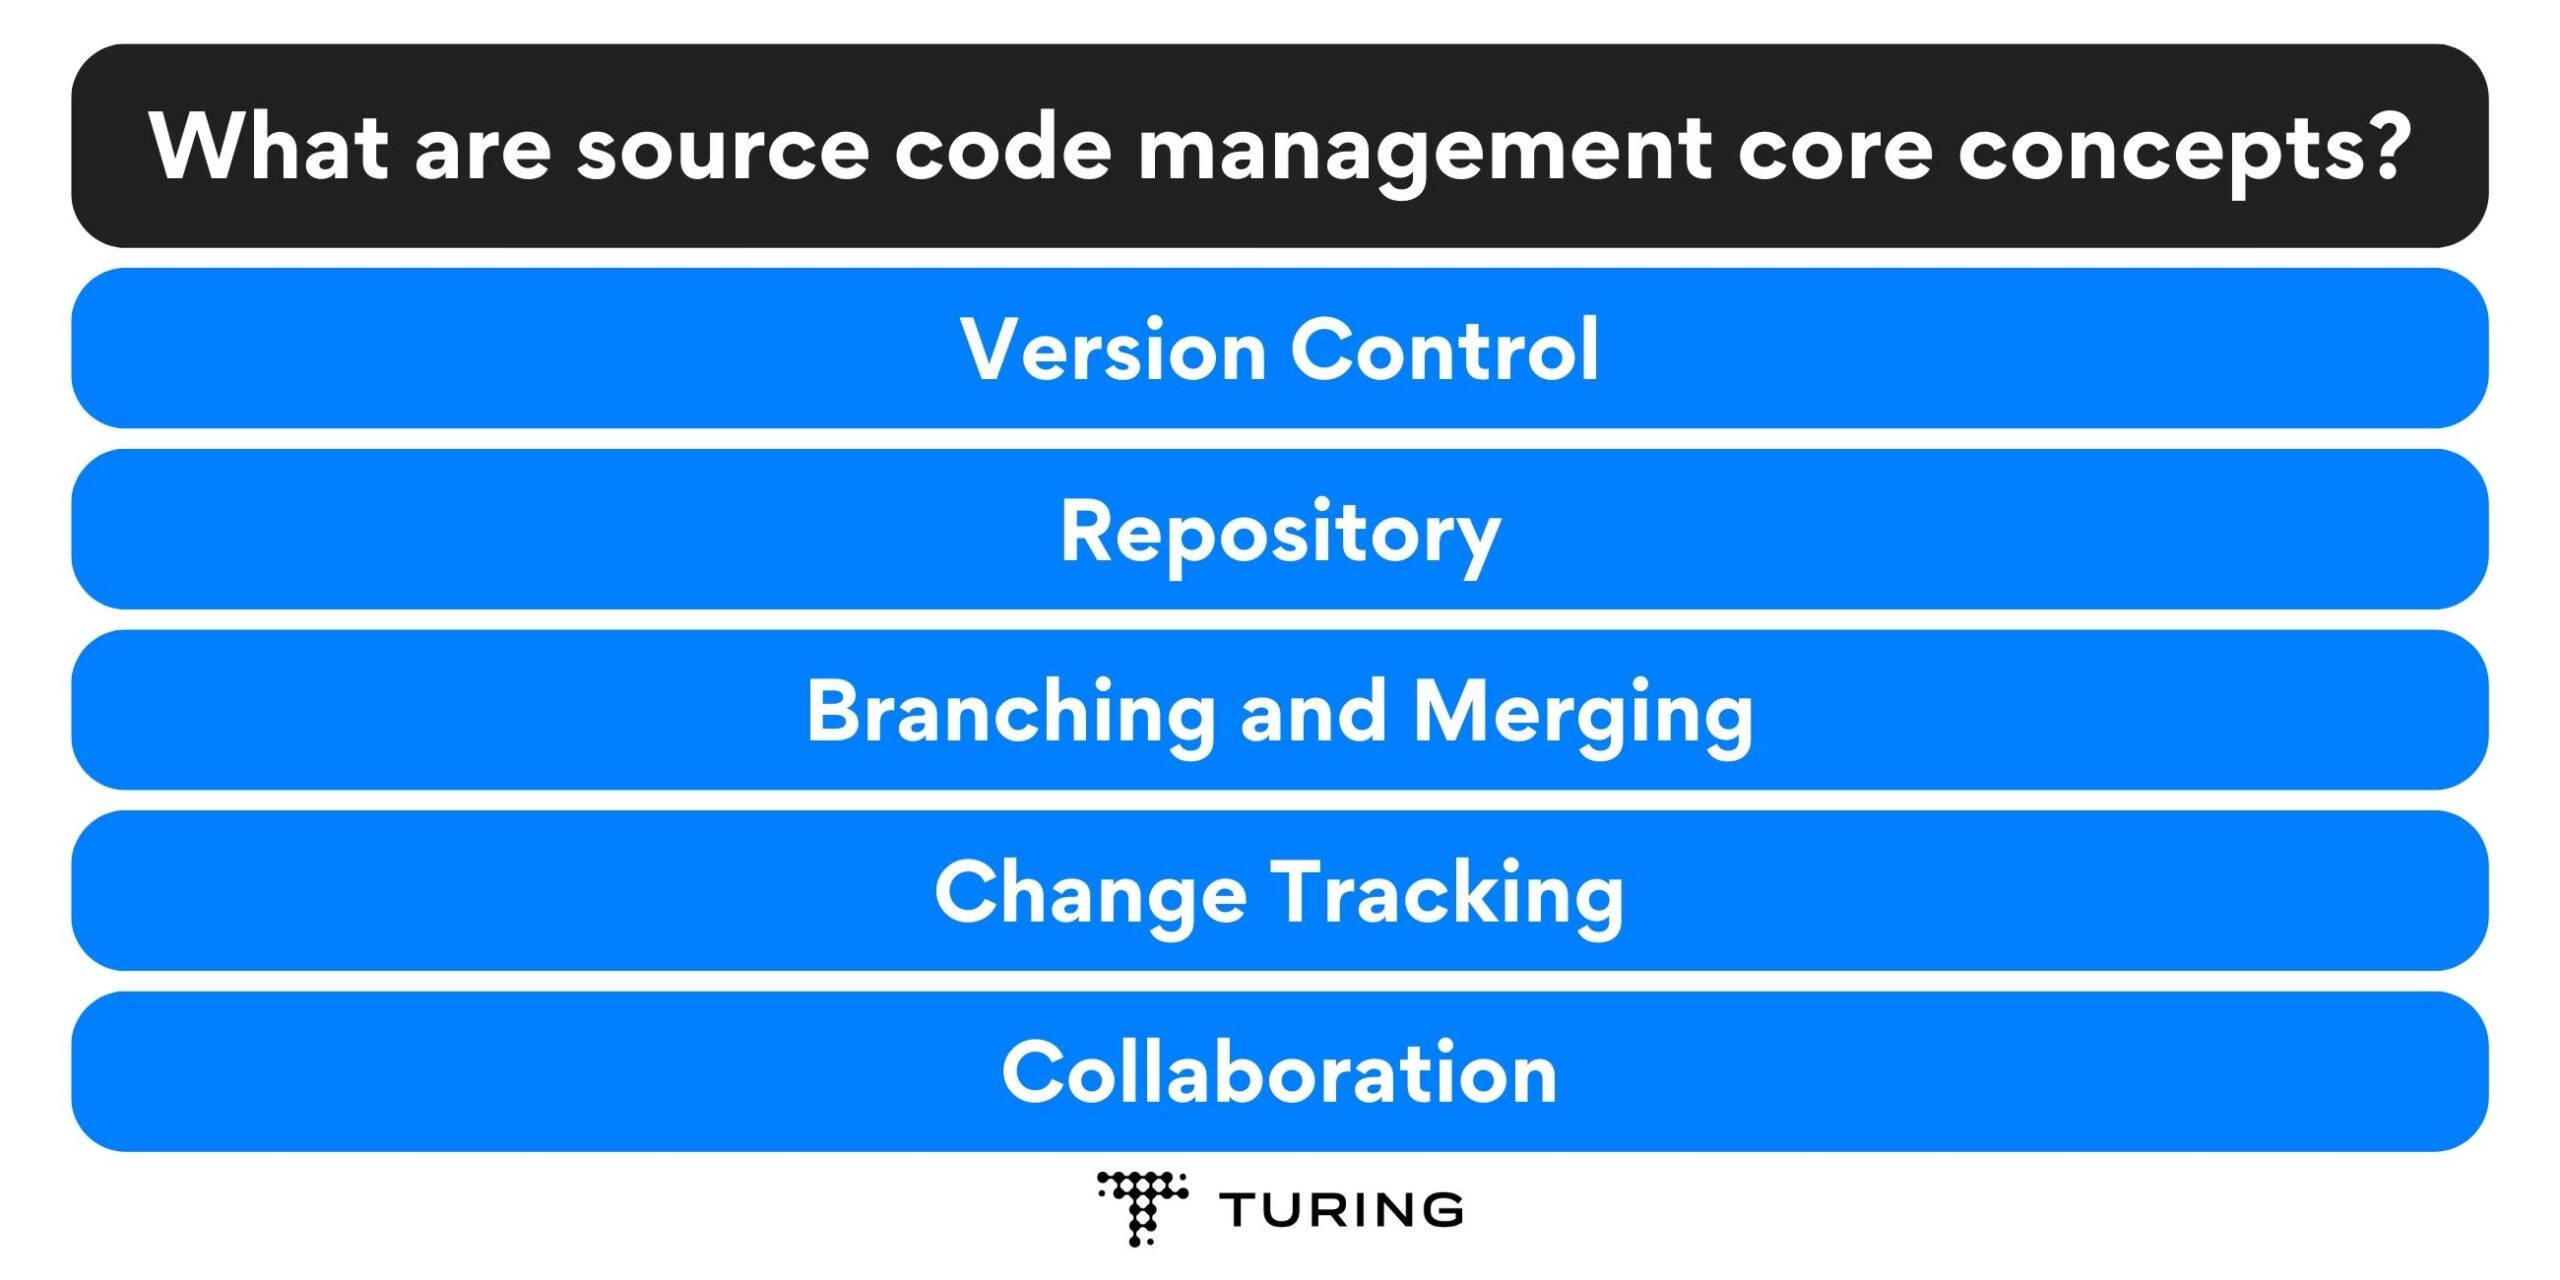 What are source code management core concepts?